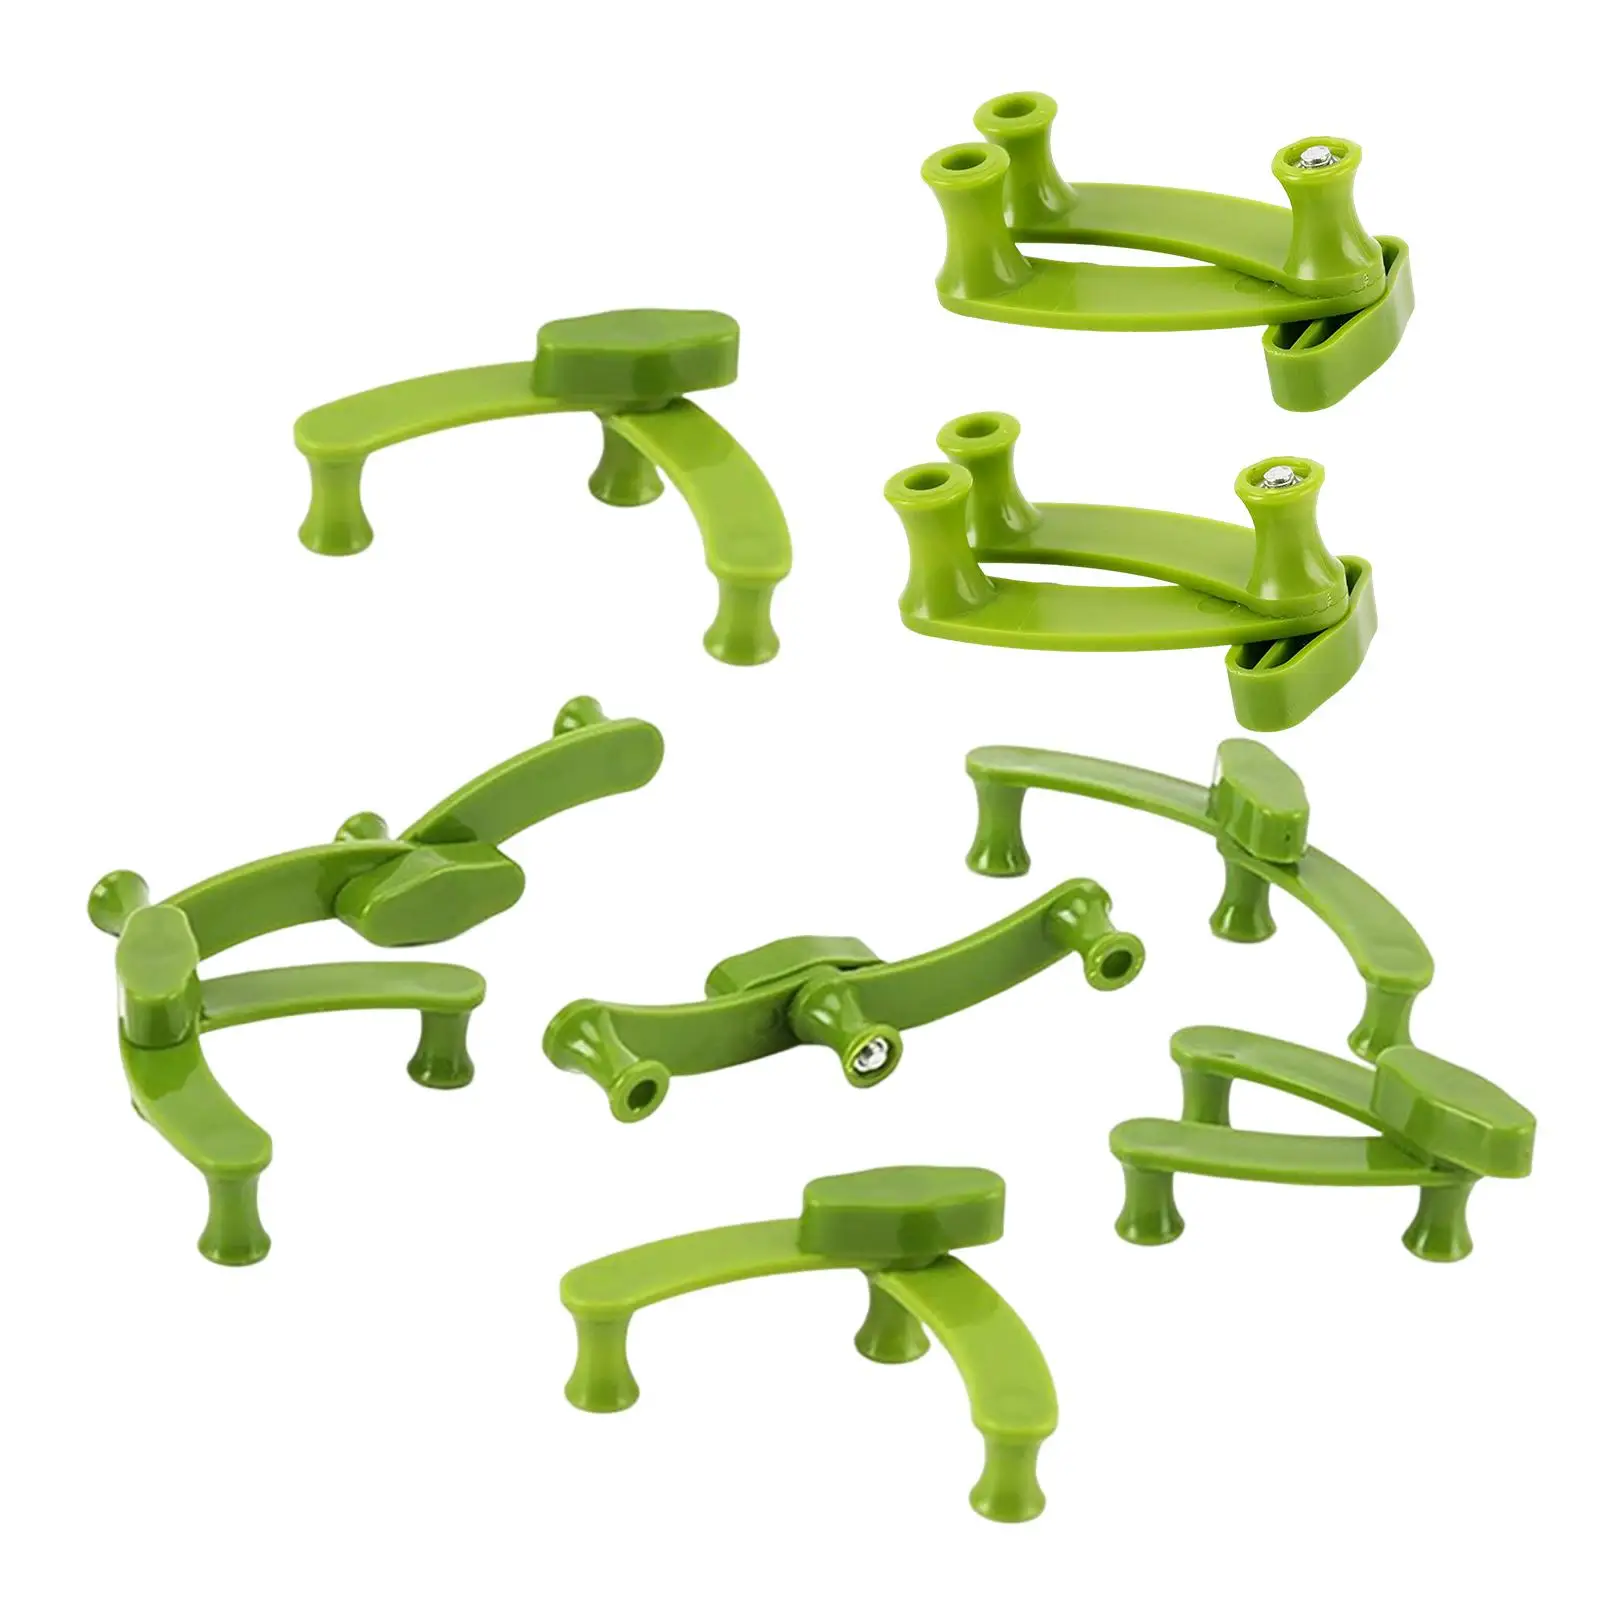 10Pcs Tree Branch Spreader Apple Trunk Pressing and Pulling Branch Support Limb